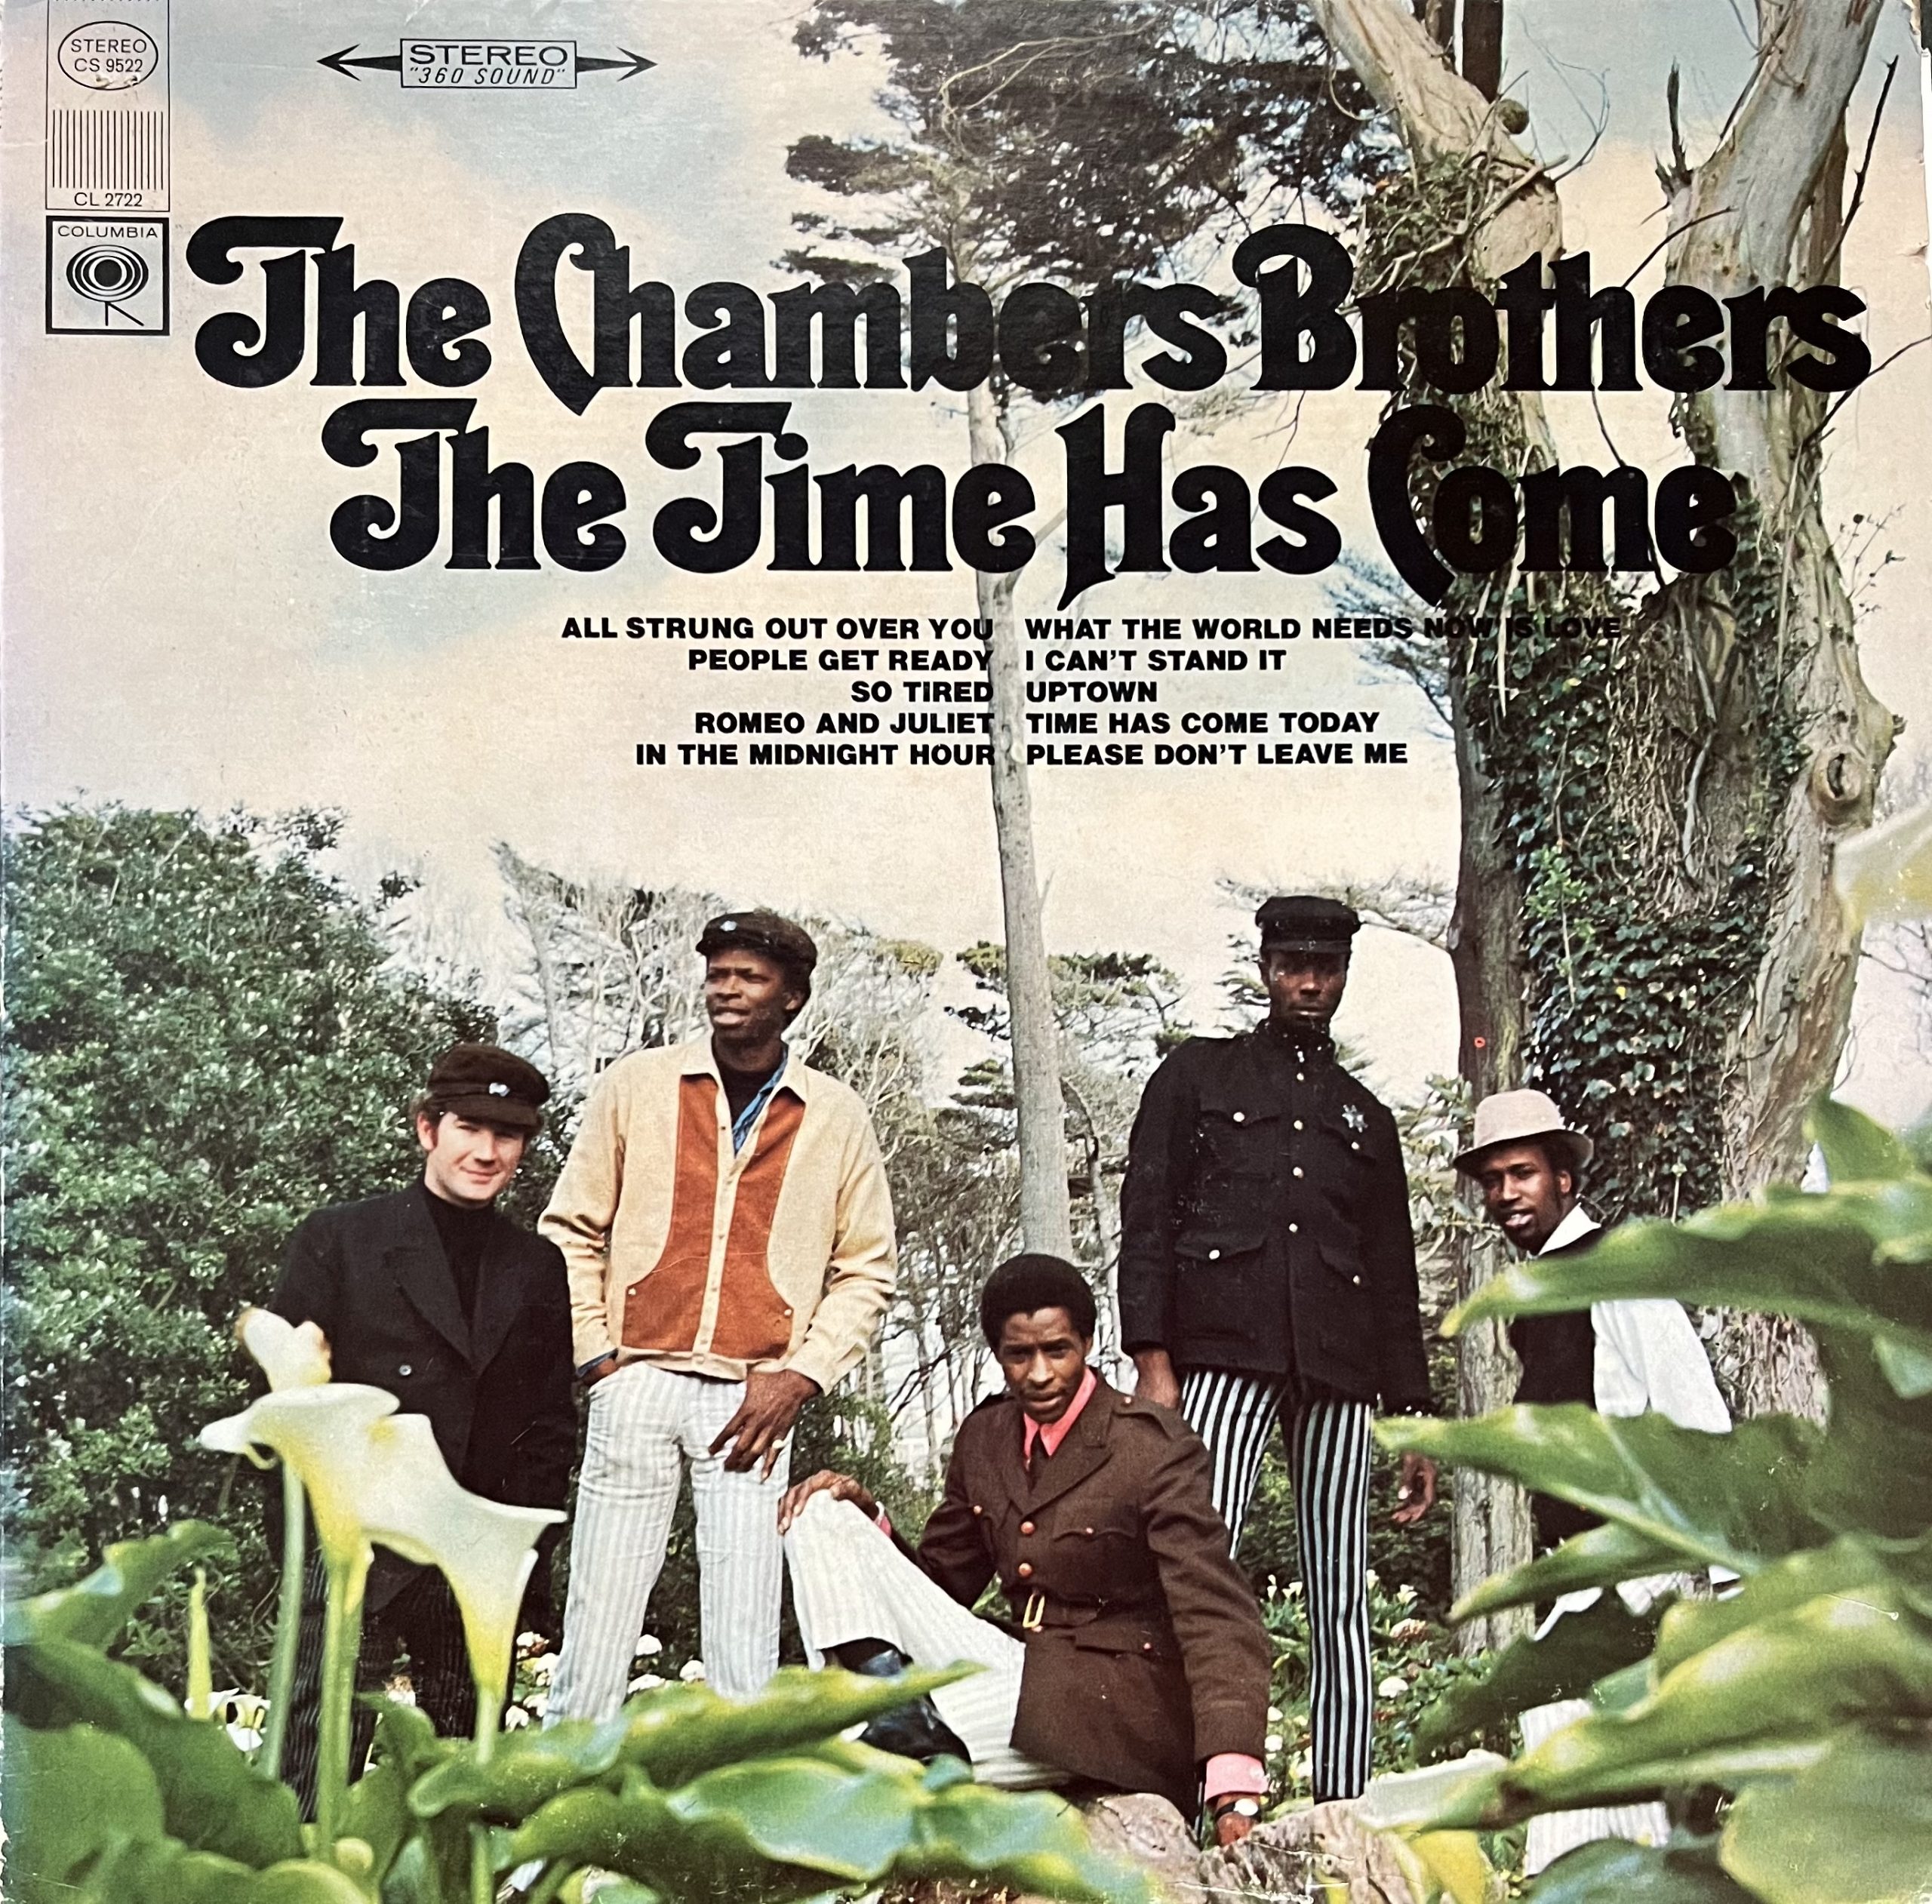 Album cover for The Chambers Brothers "The Time Has Come"